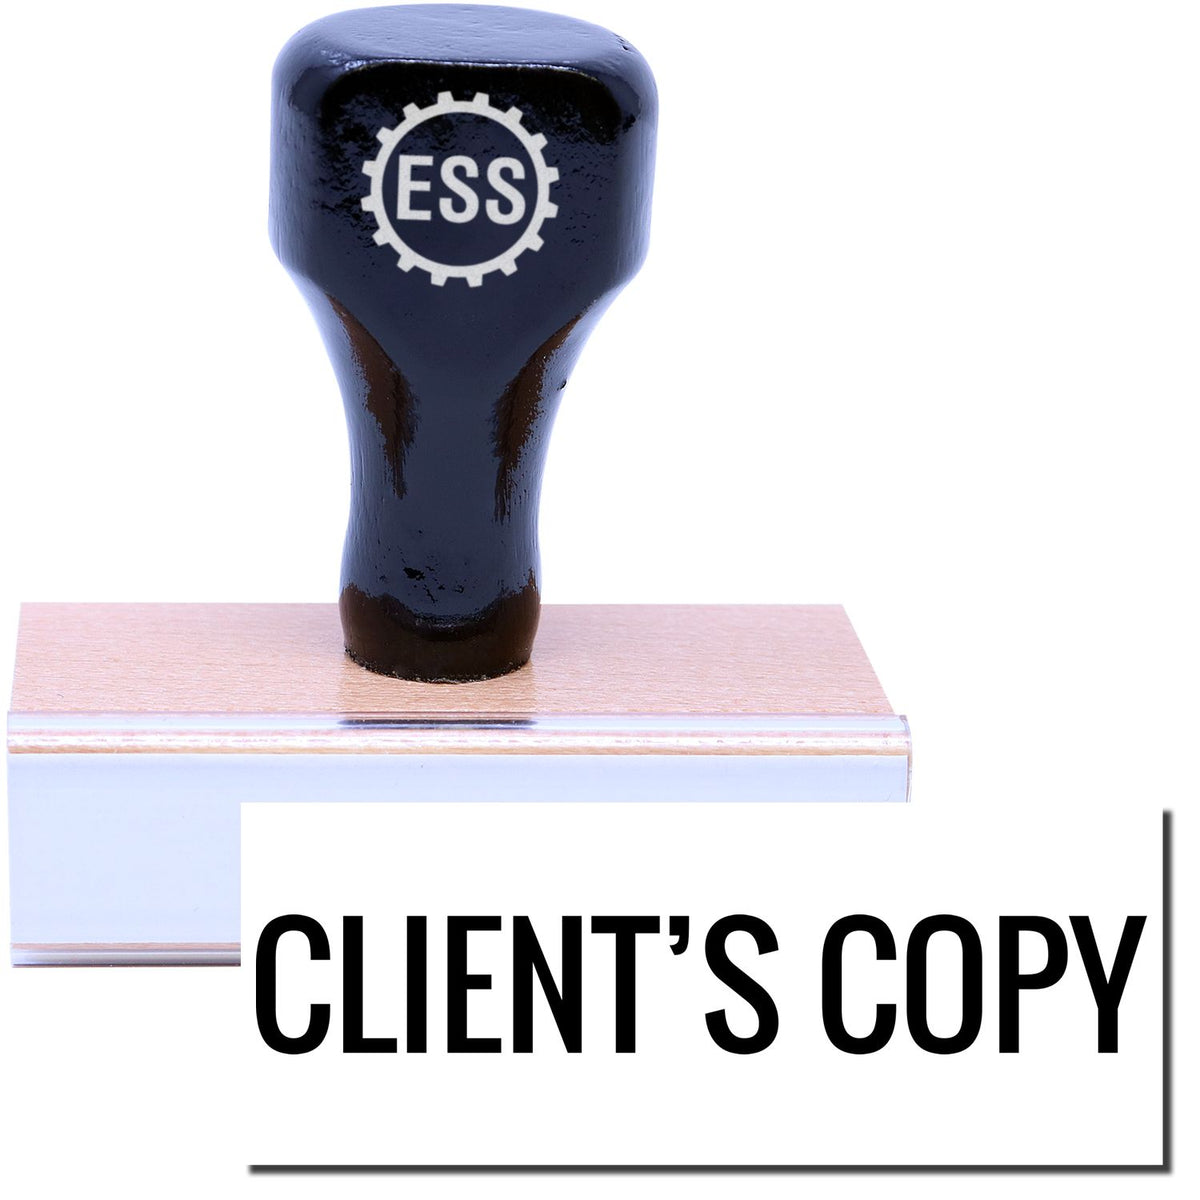 A stock office rubber stamp with a stamped image showing how the text &quot;CLIENT&#39;S COPY&quot; in a large font is displayed after stamping.